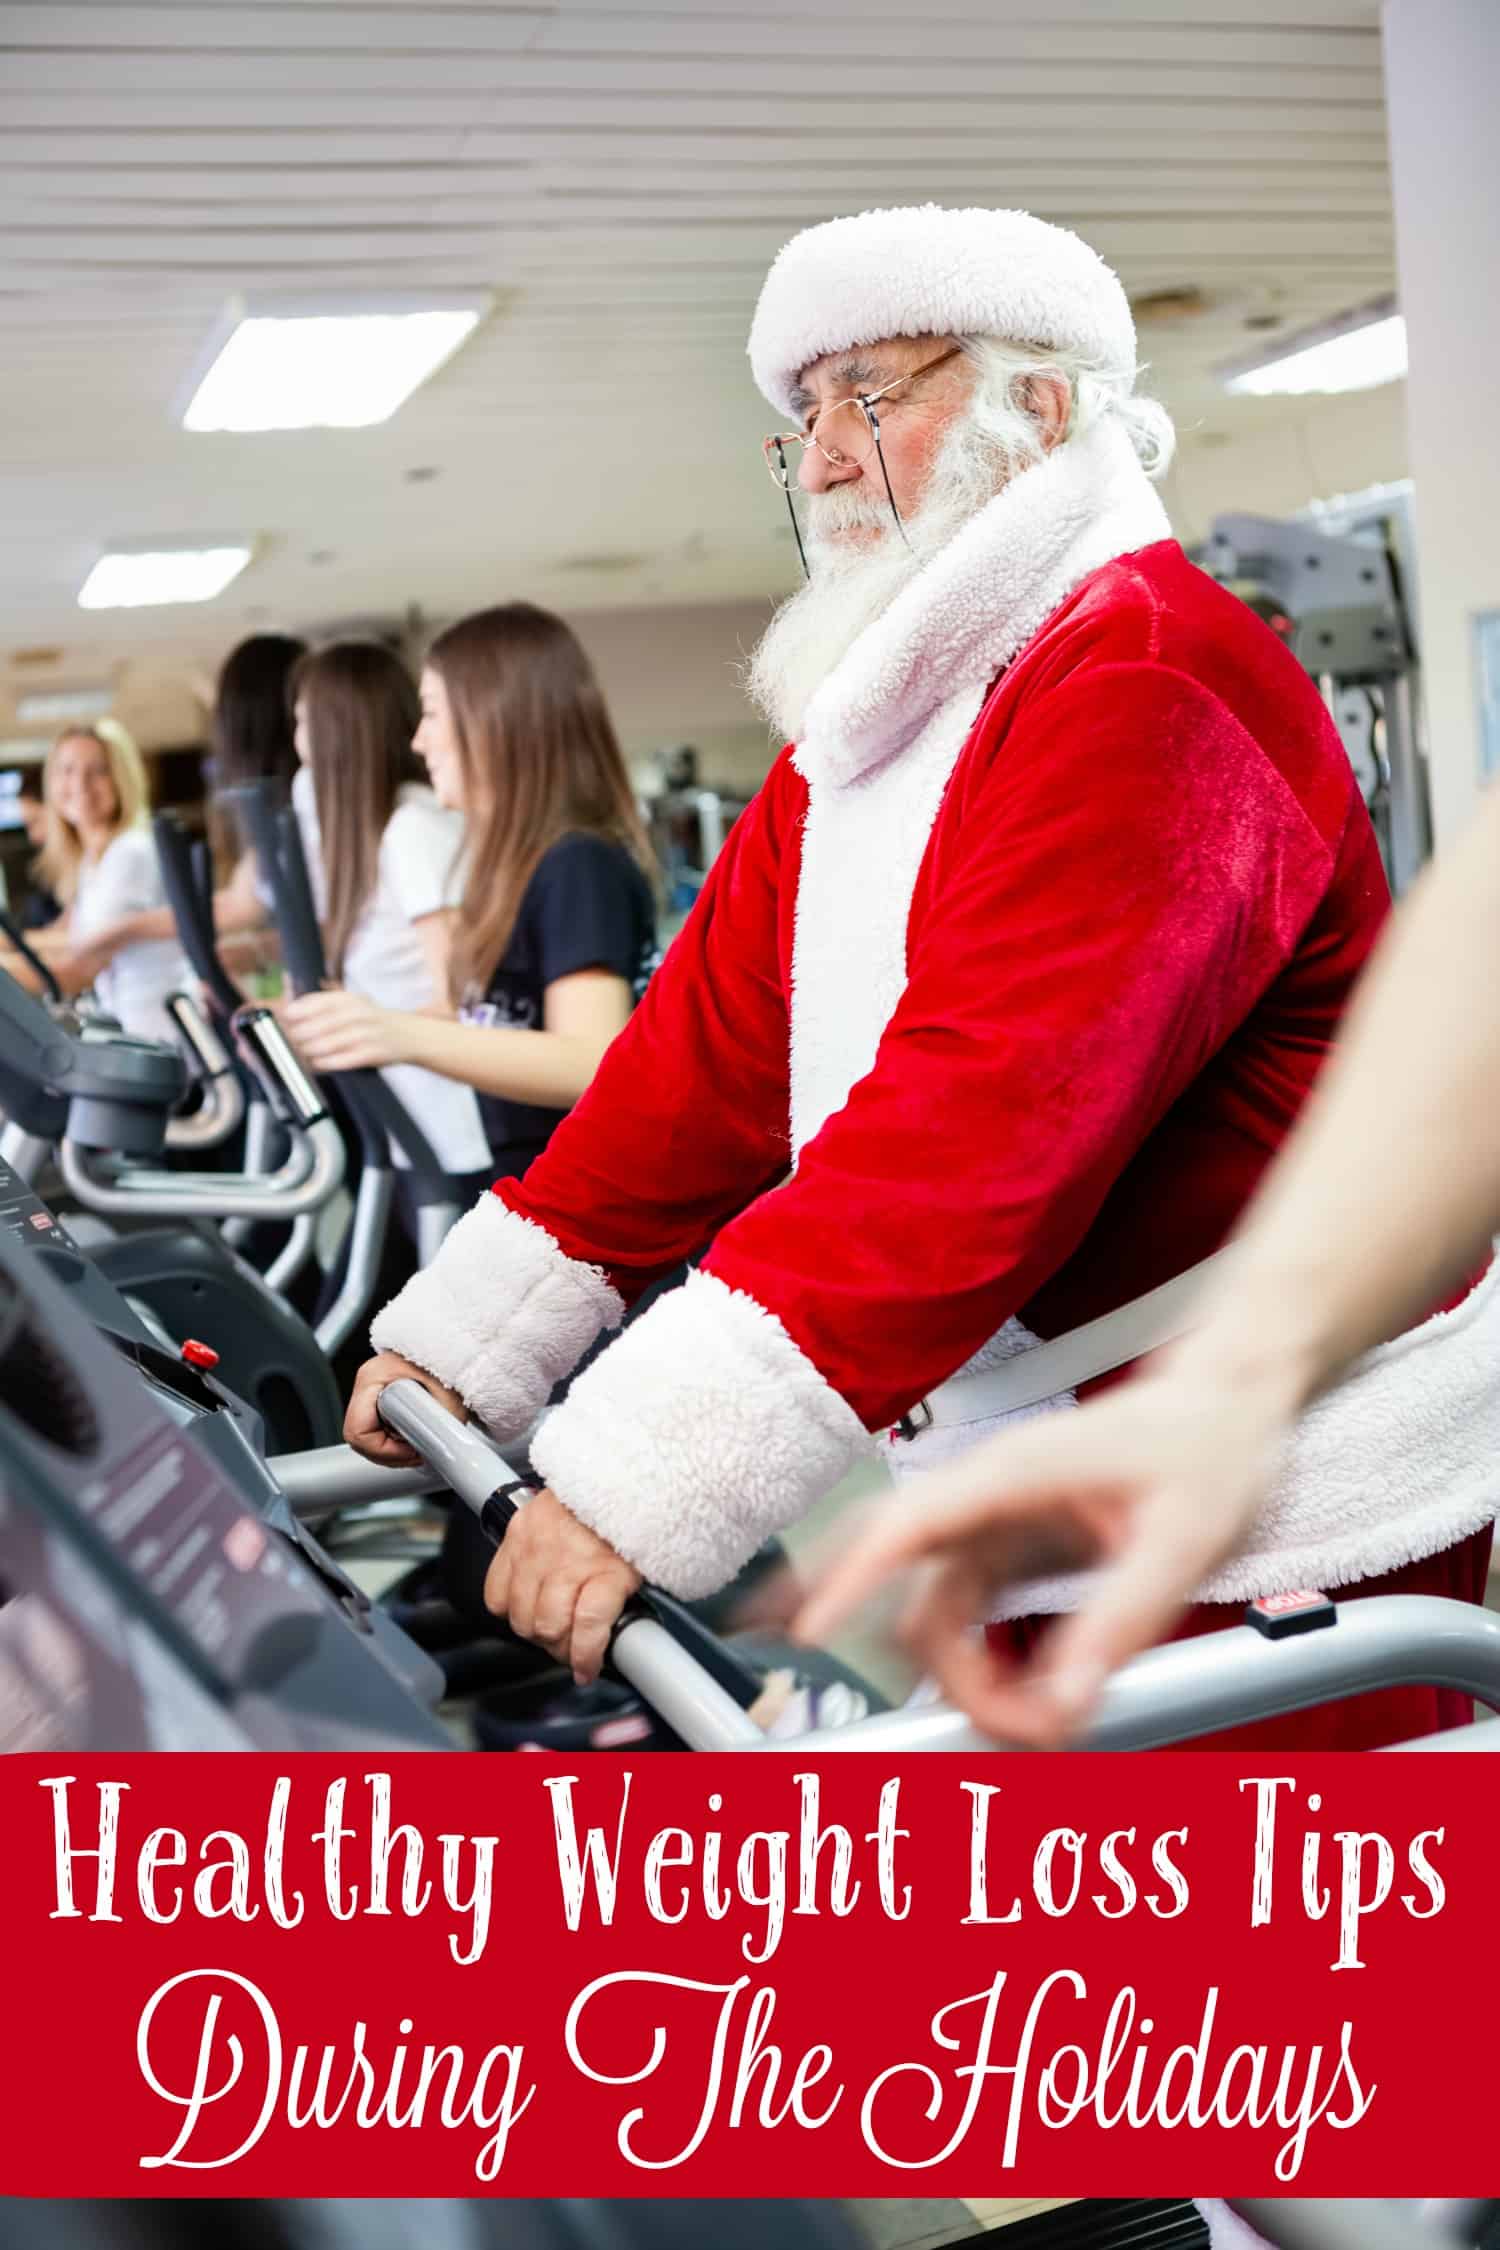 Healthy Weight Loss Tips During the Holidays